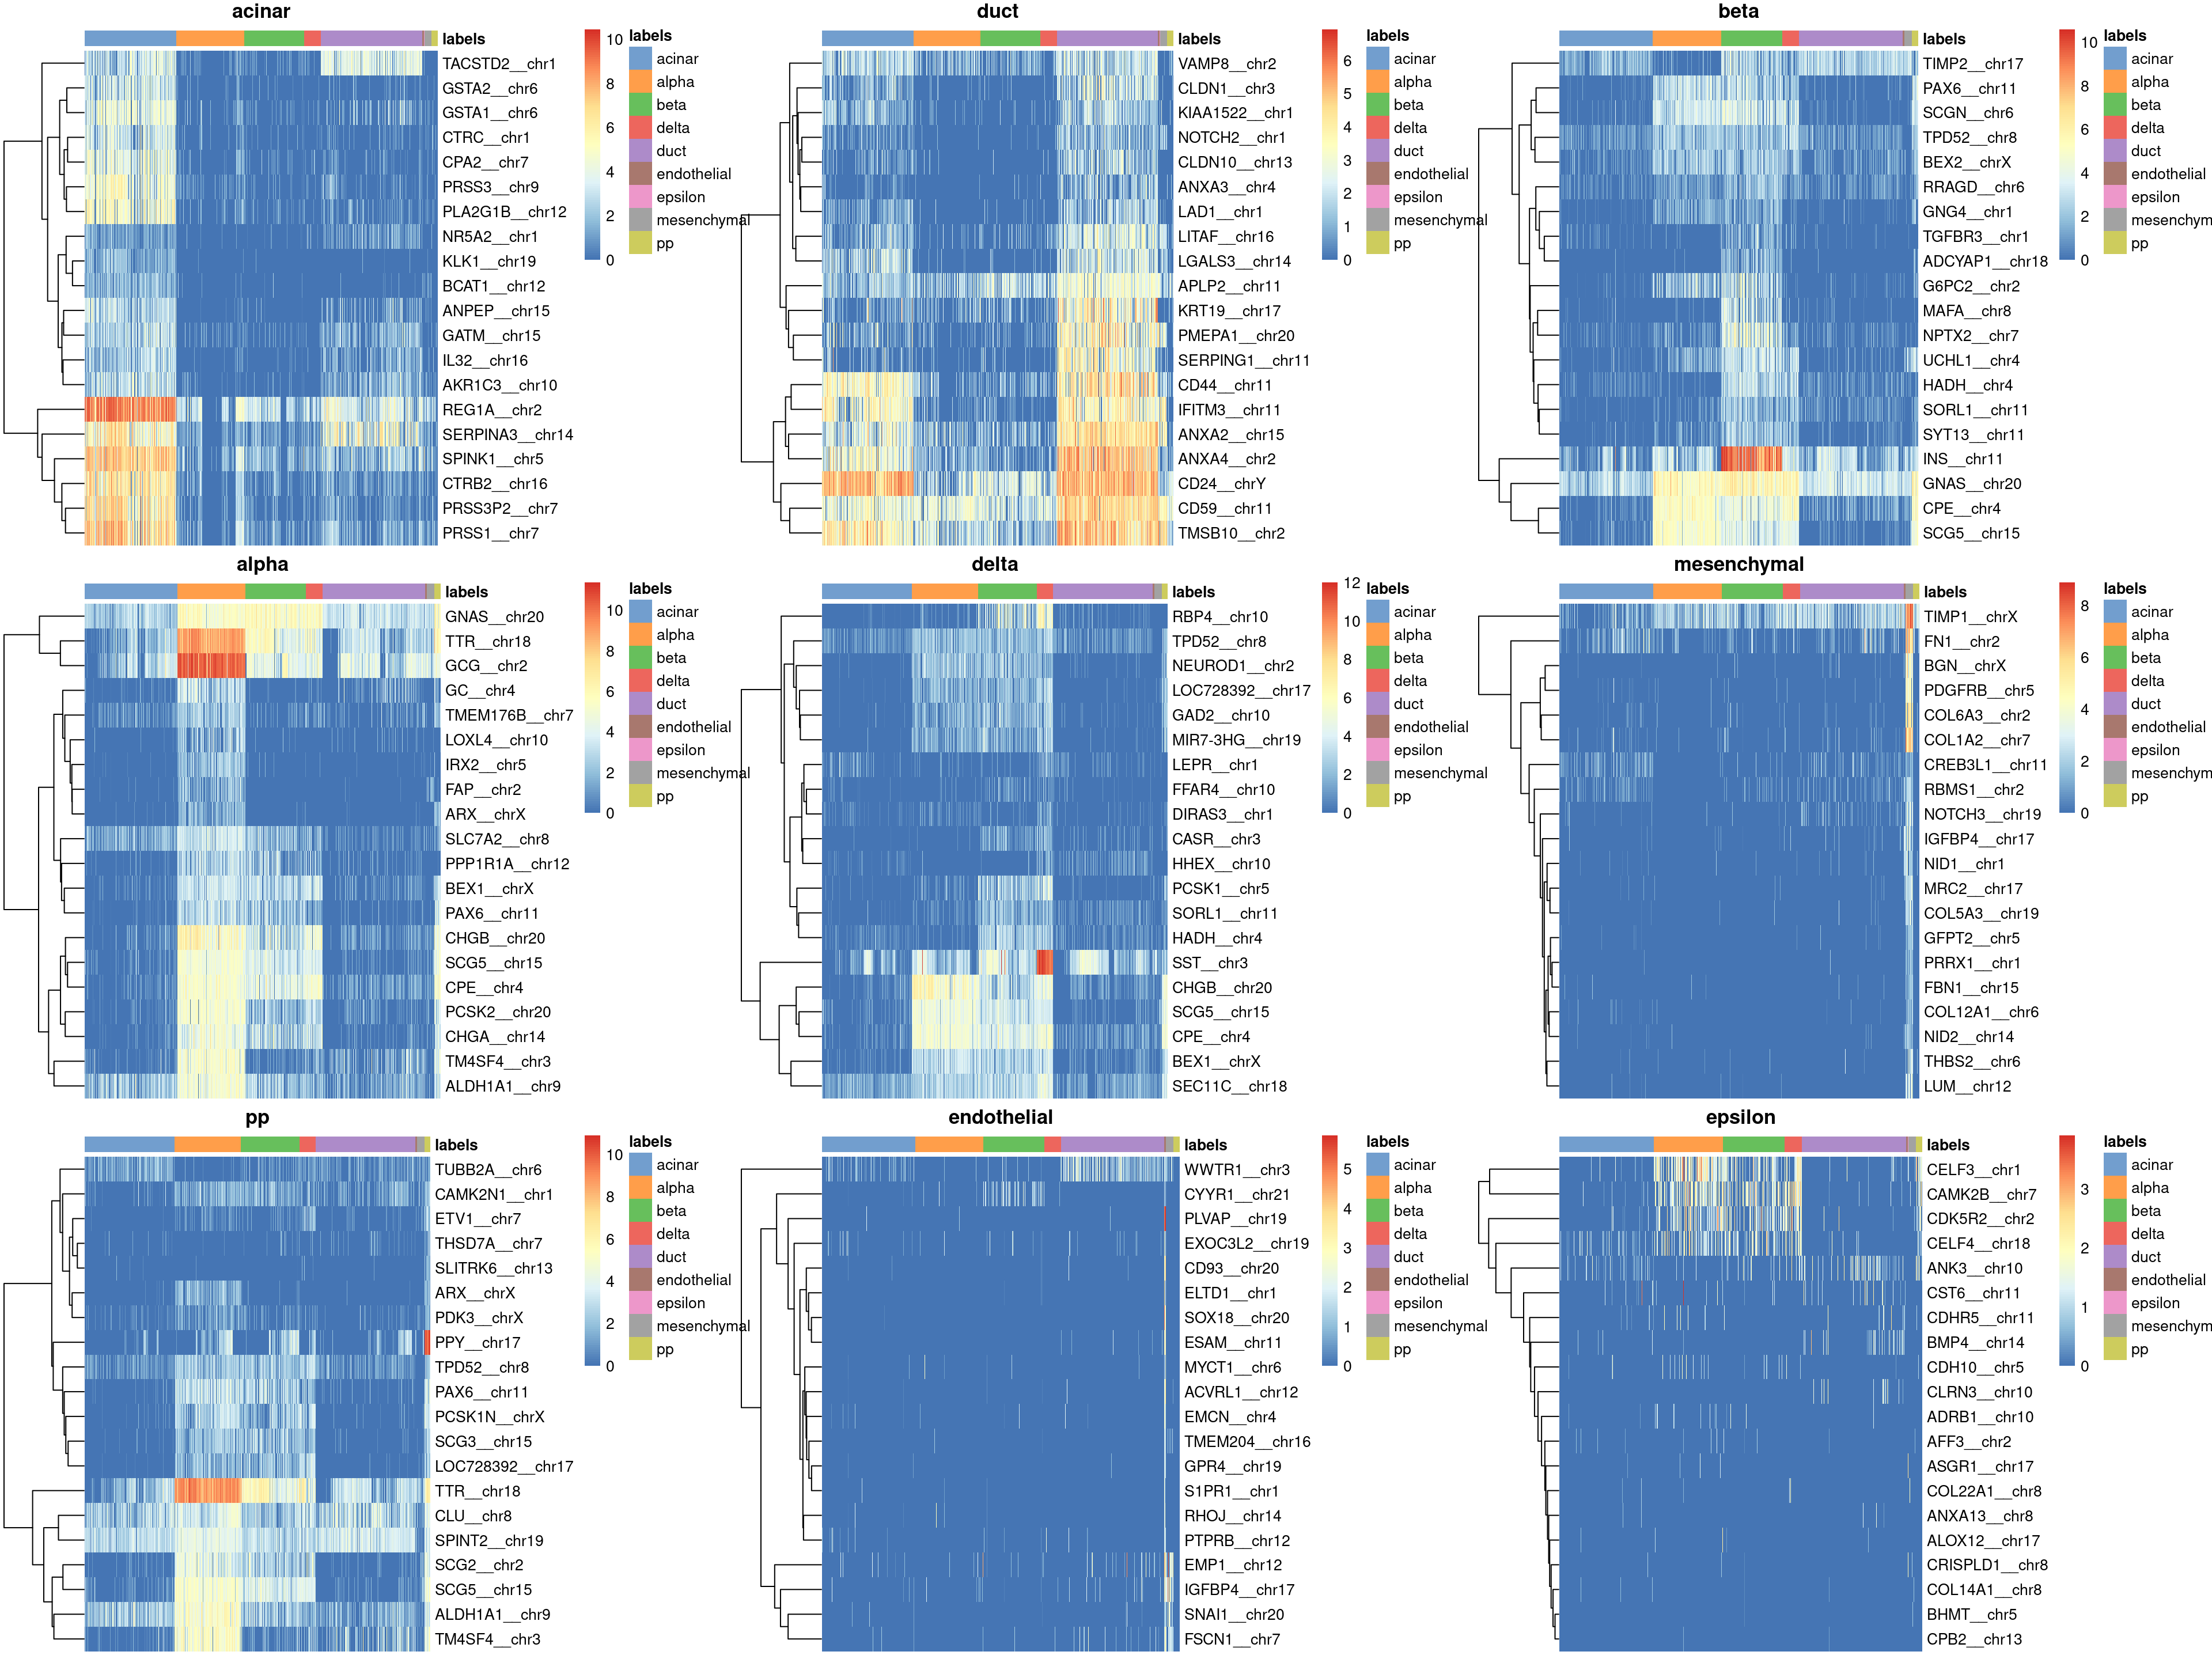 Heatmaps of log-expression values in the Grun dataset for all marker genes upregulated in each label in the Muraro reference dataset. Assigned labels for each cell are shown at the top of each plot.